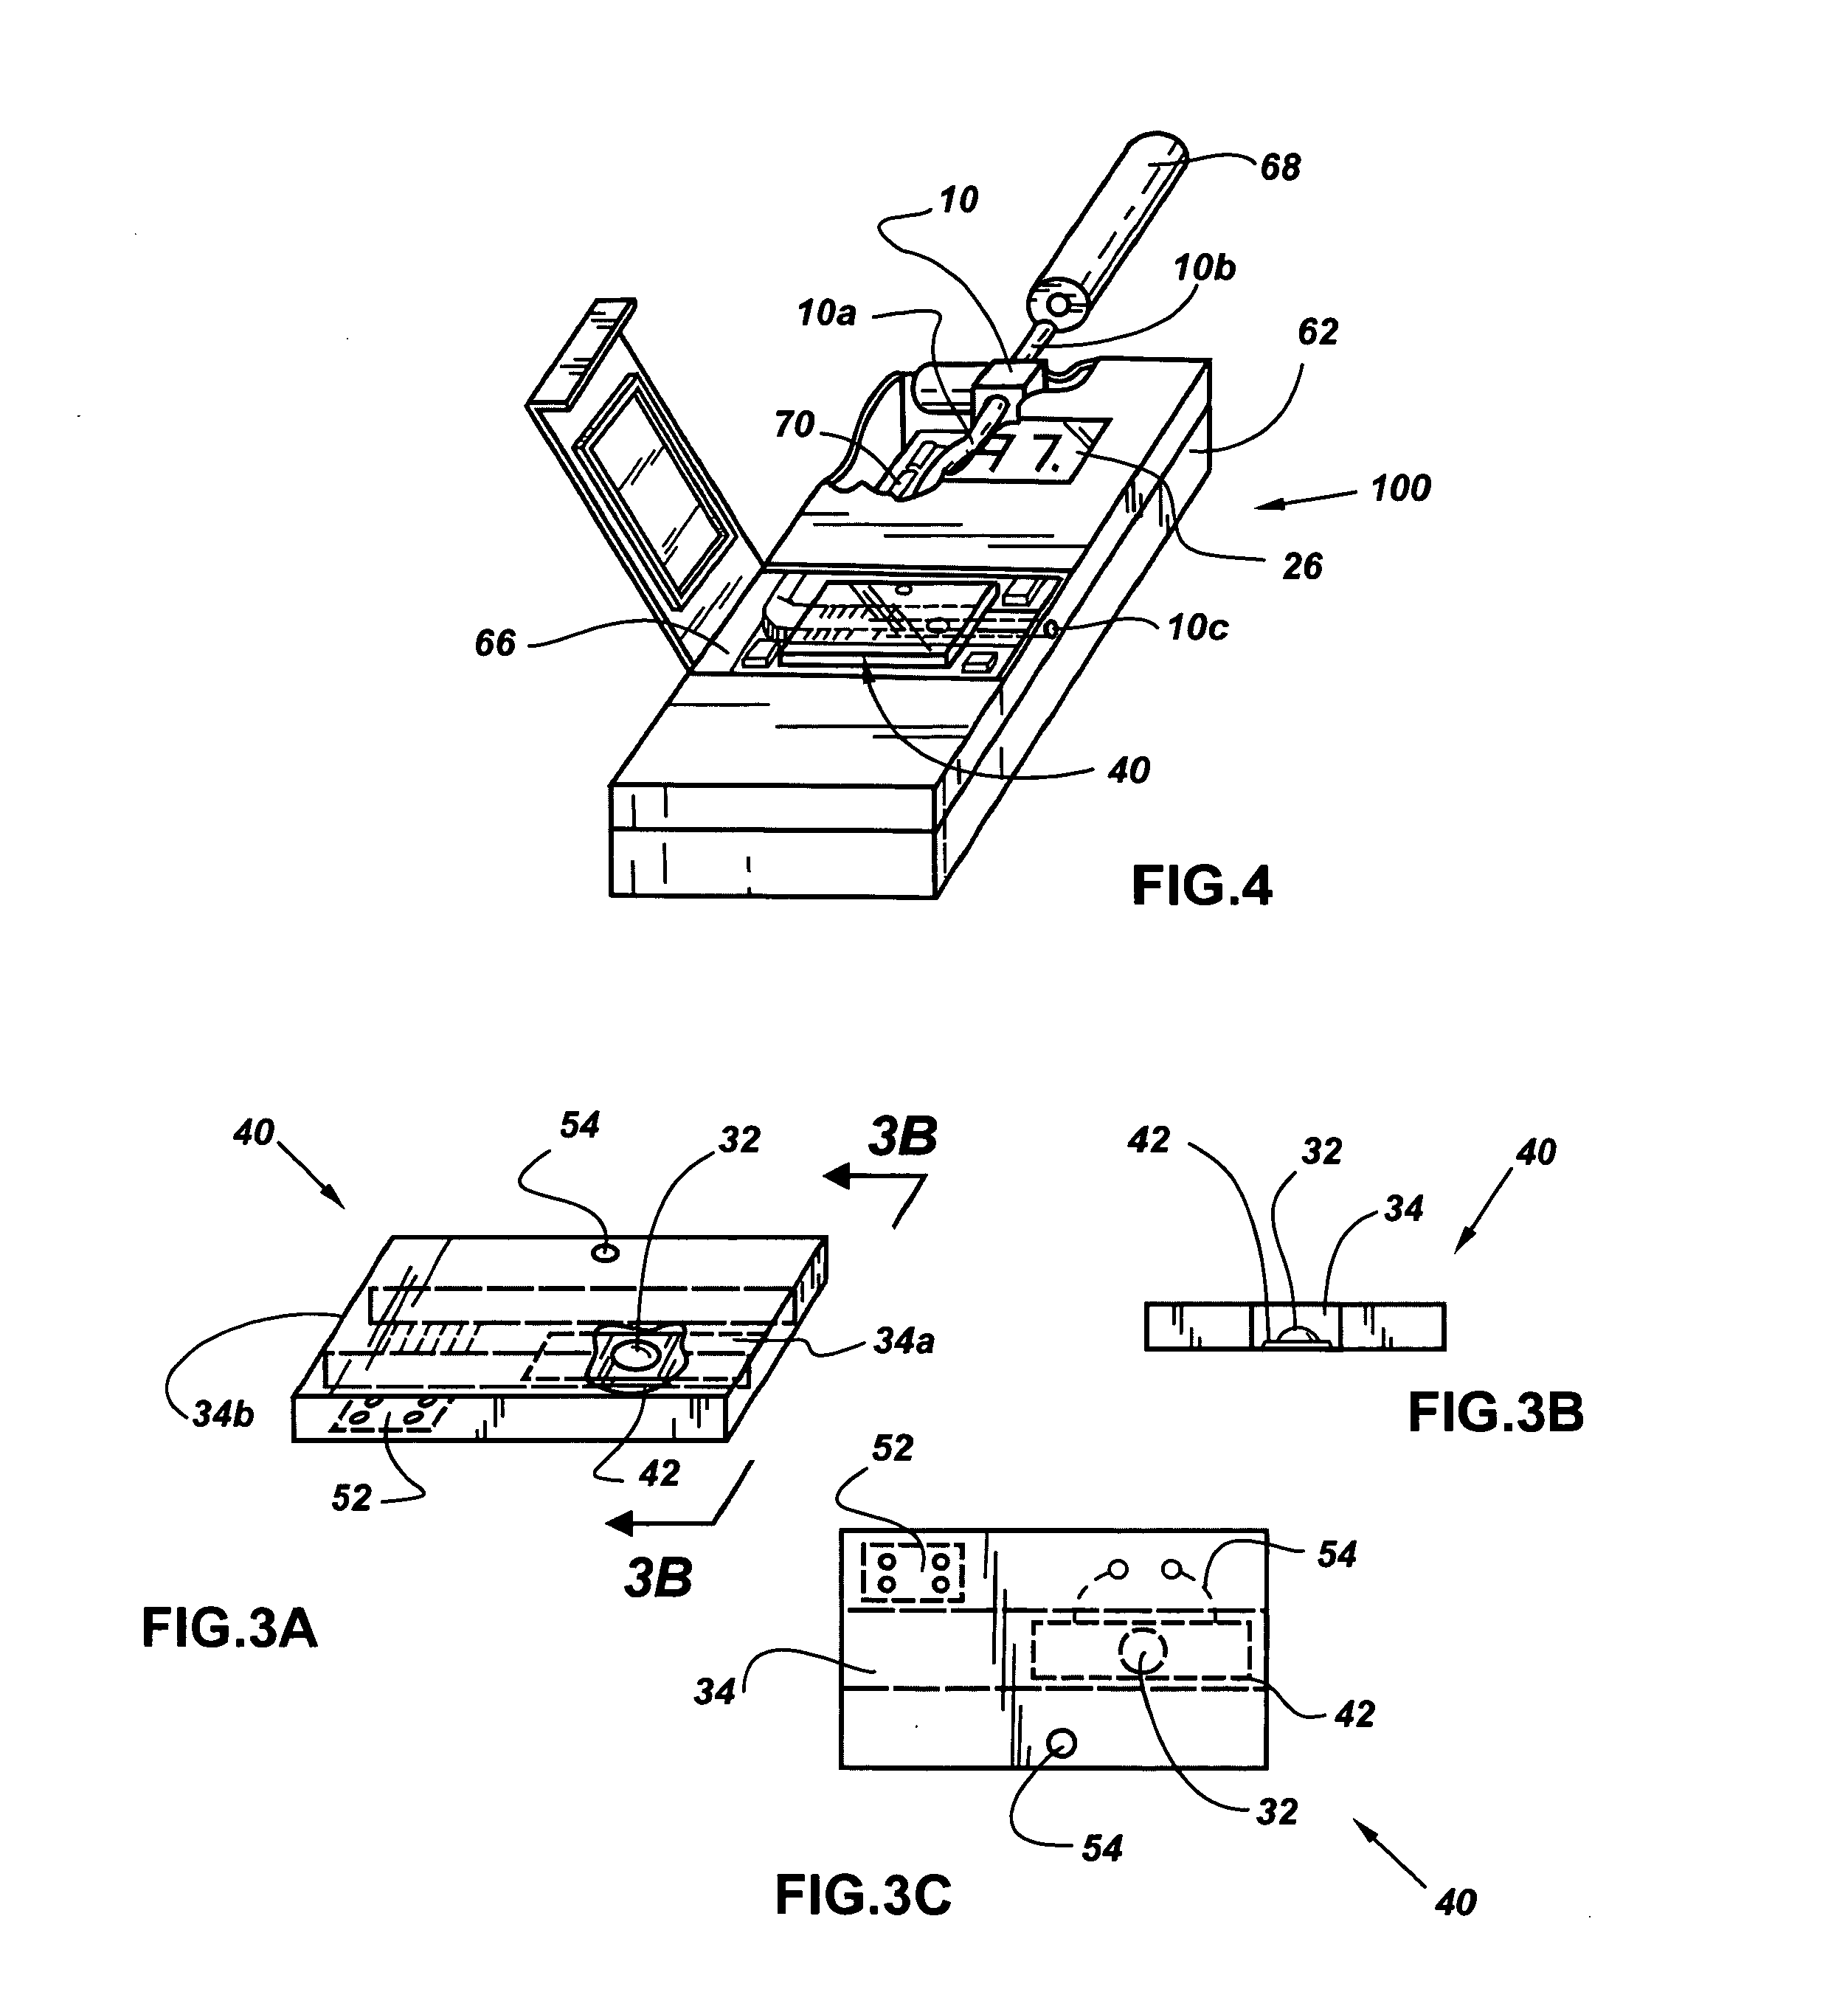 Apparatus, system, and method of detecting an analyte utilizing pyroelectric technology